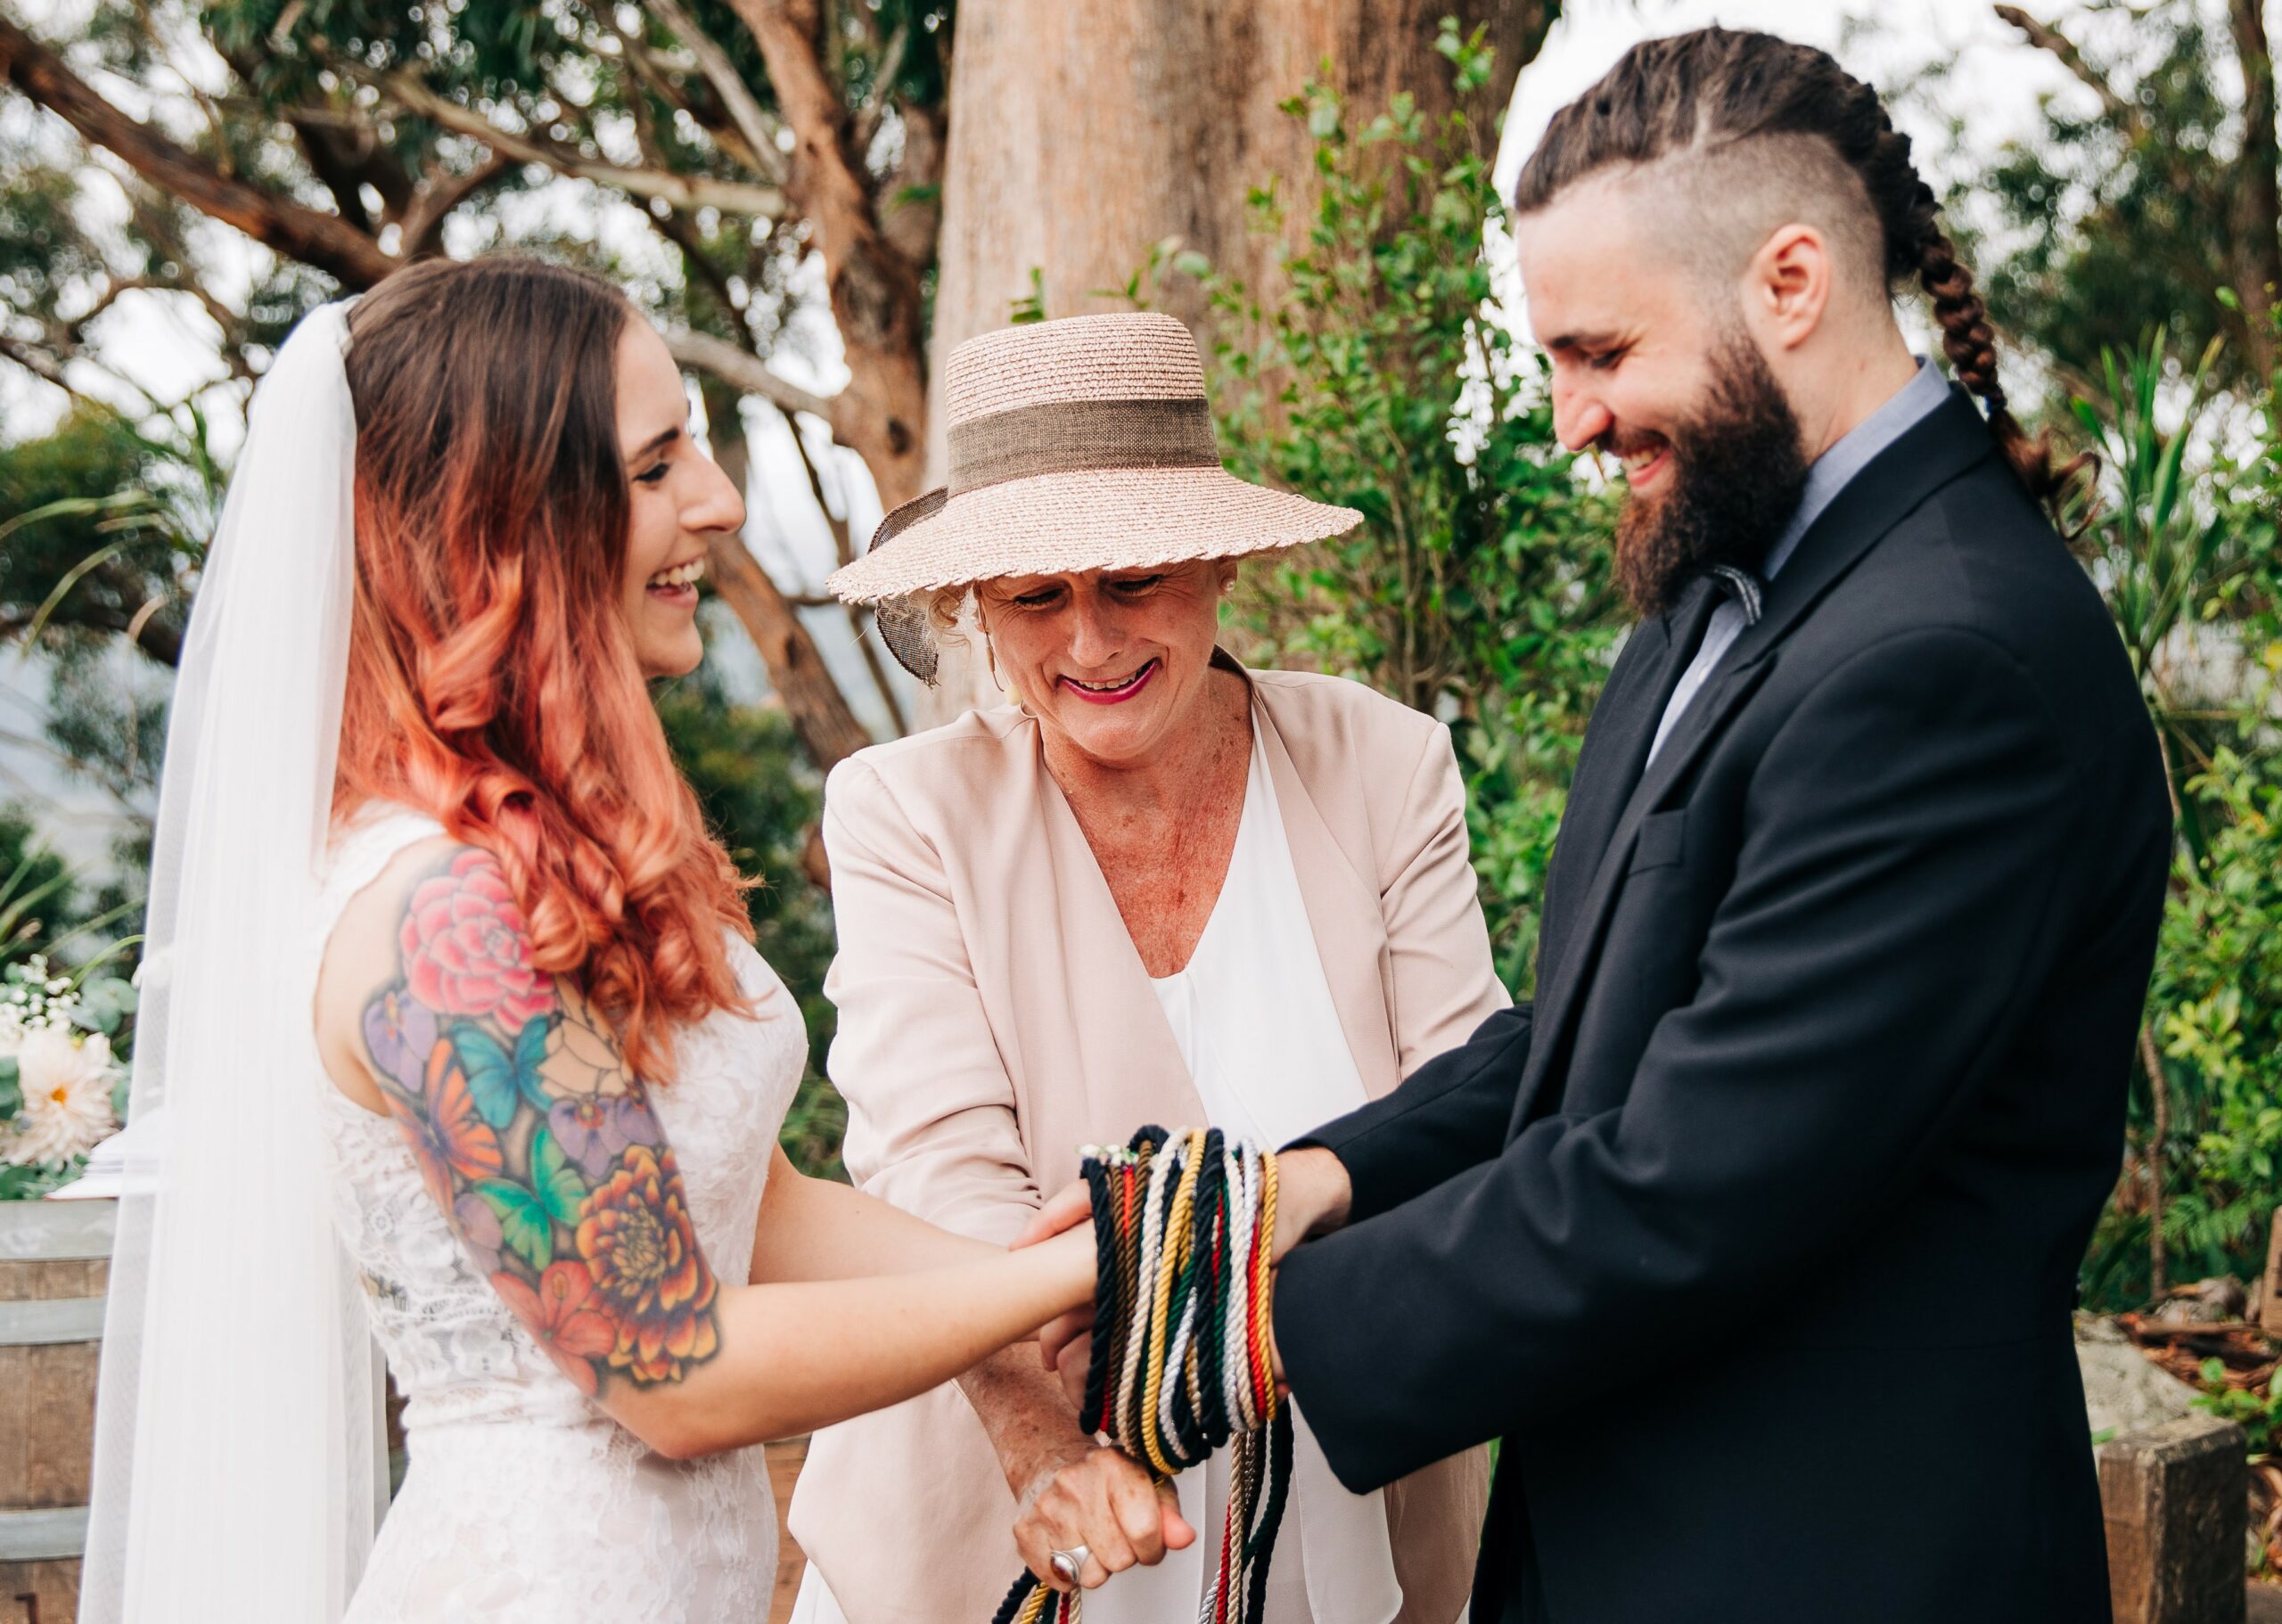 A bride with bright tattoos and a grown with a Viking braid clasp hands as their celebrant winds coloured cords around their hands.